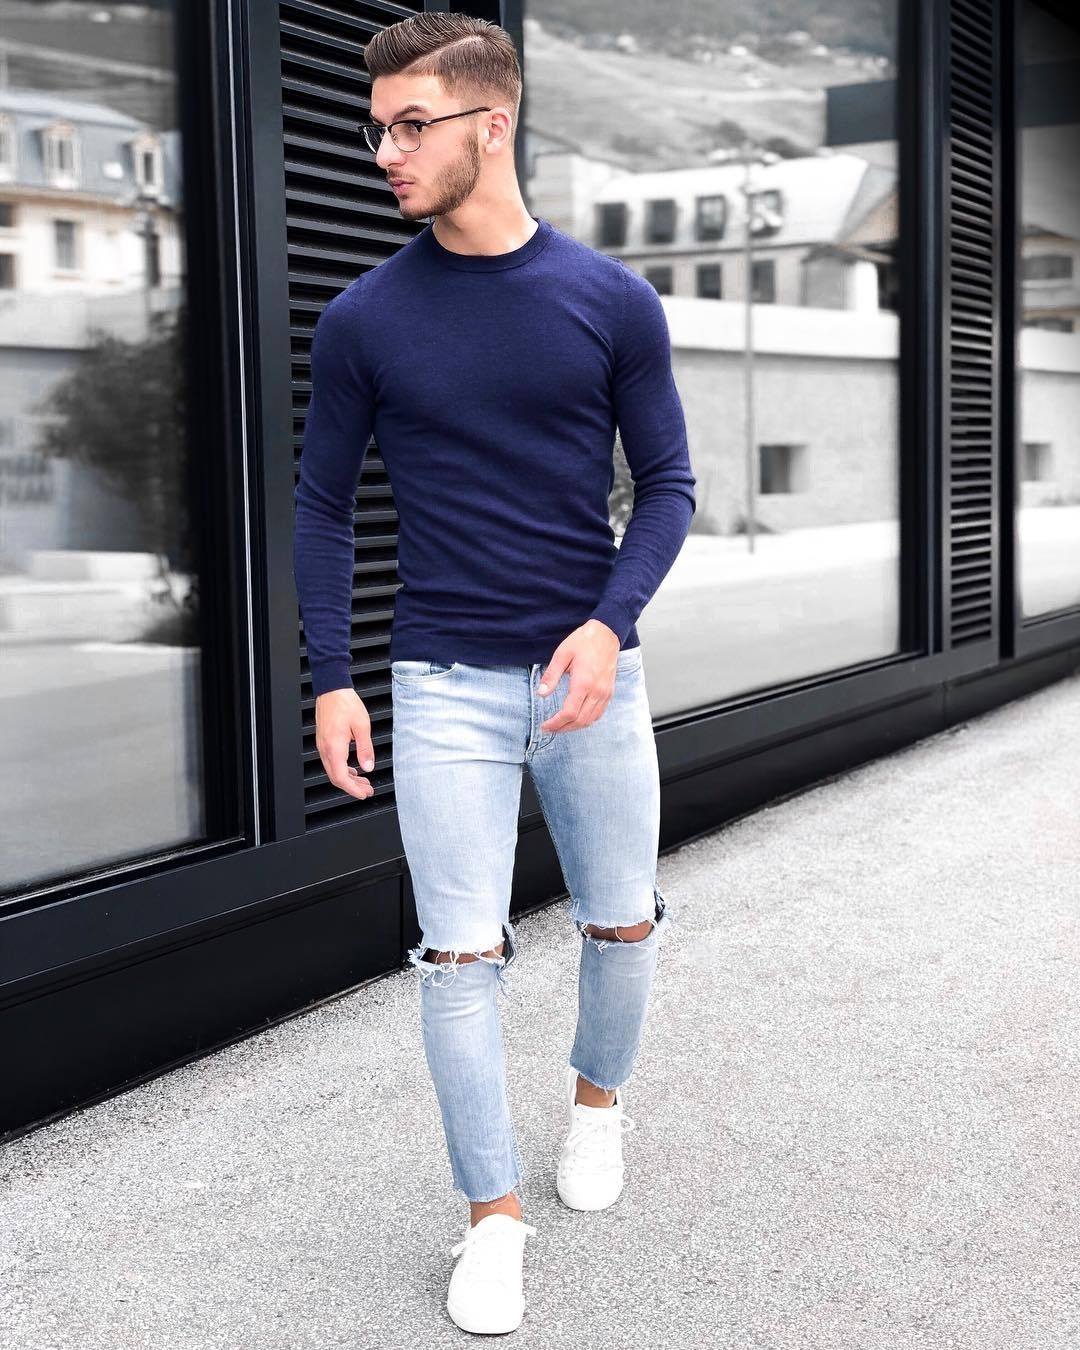 25 Best Outfits For Men to Wear in December 2022